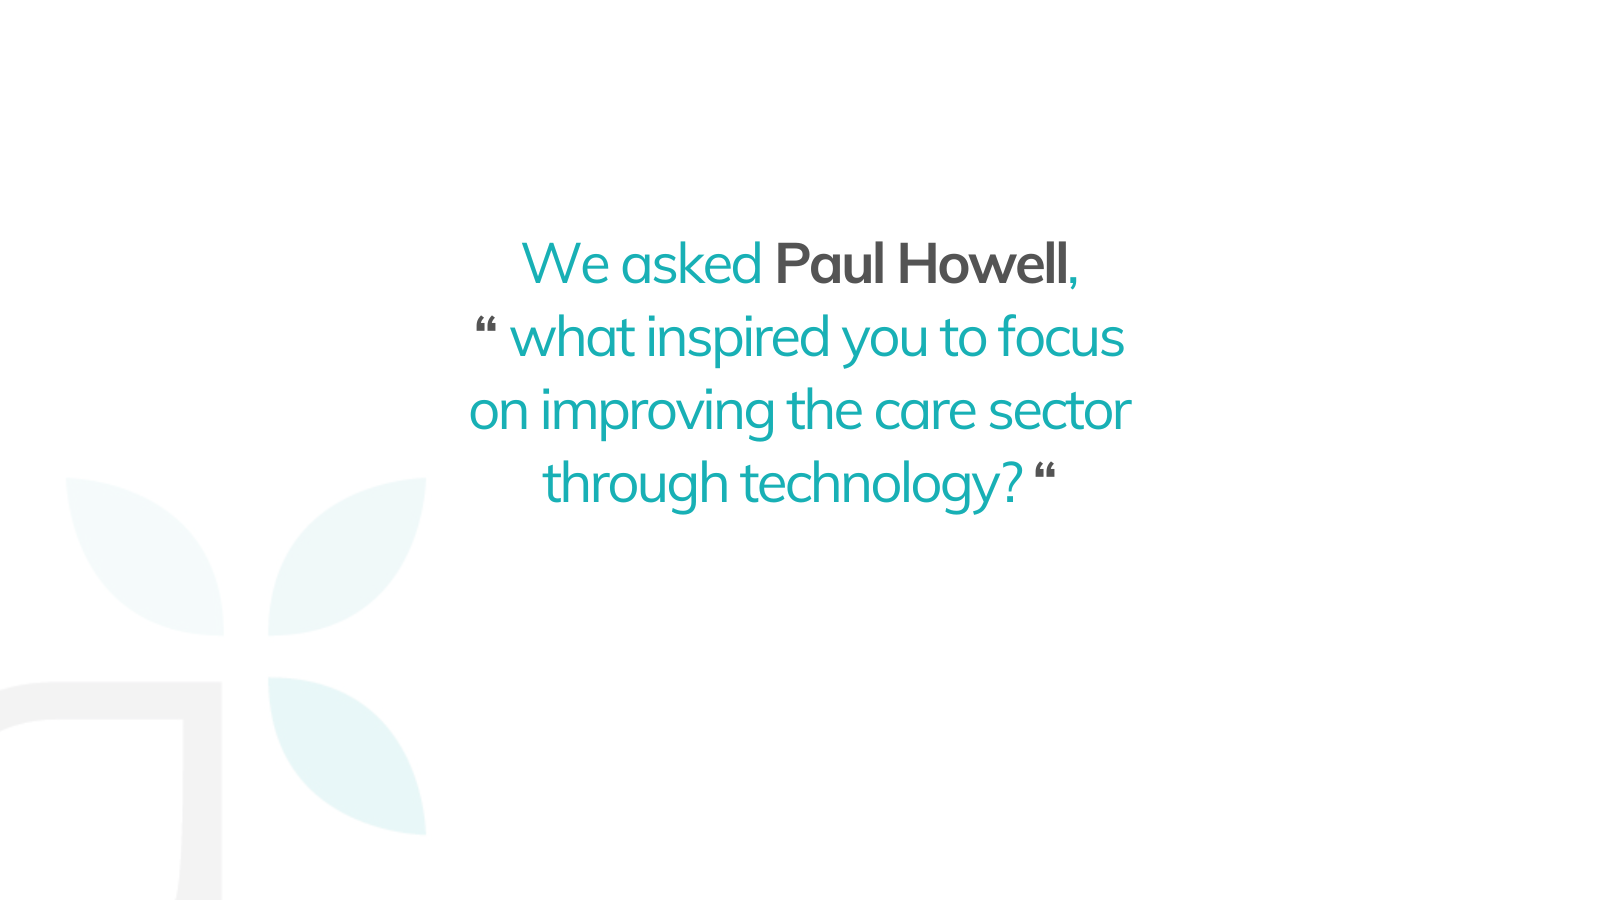 Paul Howell Arquella | What inspired you to focus on improving the care sector through technology?